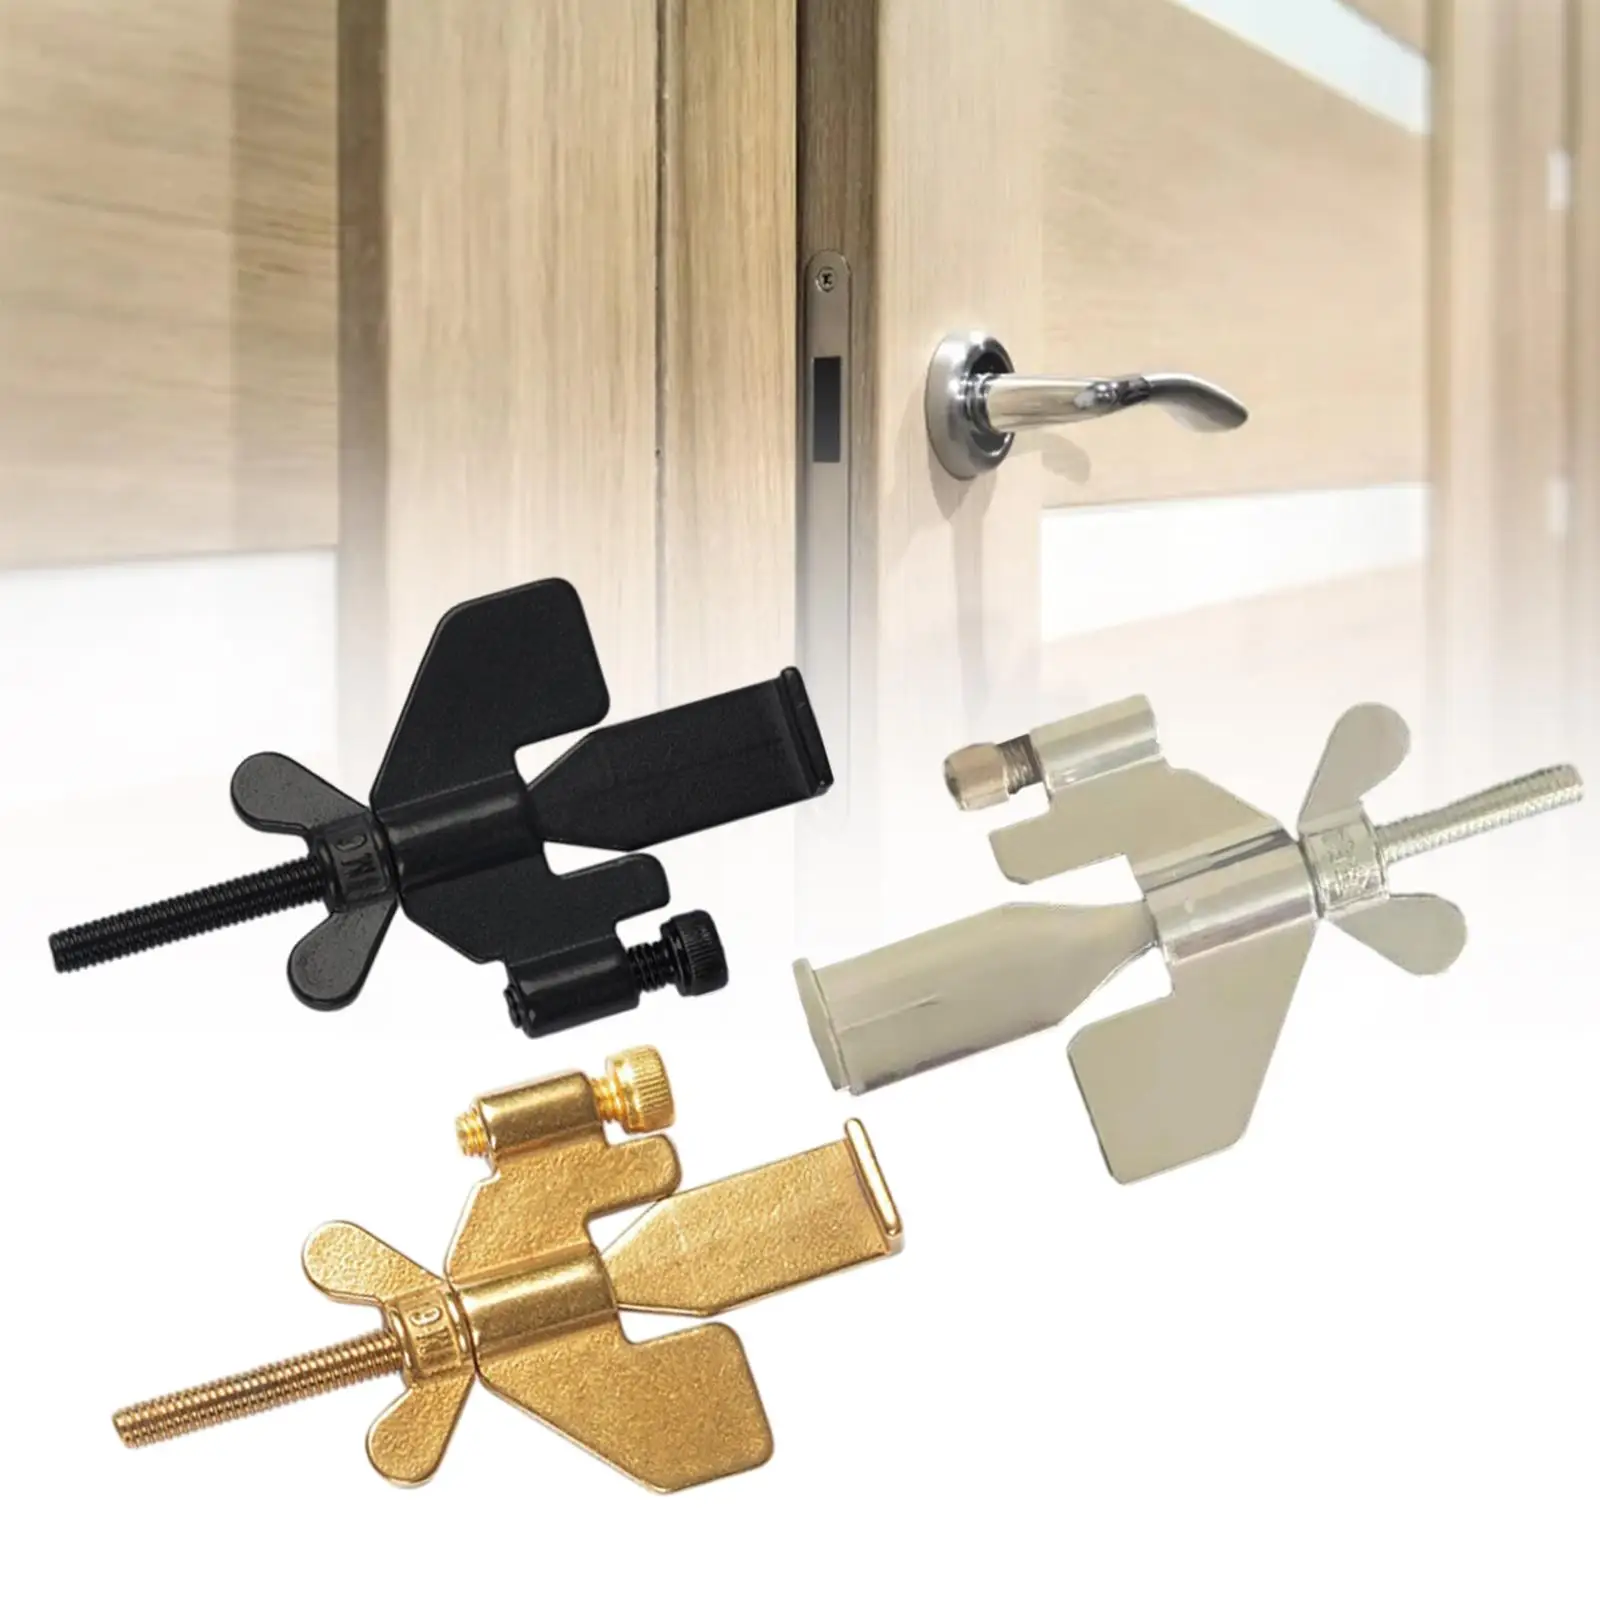 Anti Thefts Door Stopper Portable Travel Door Lock Safety Buckle Additional Devices for Home Travelers School Hotel College Dorm